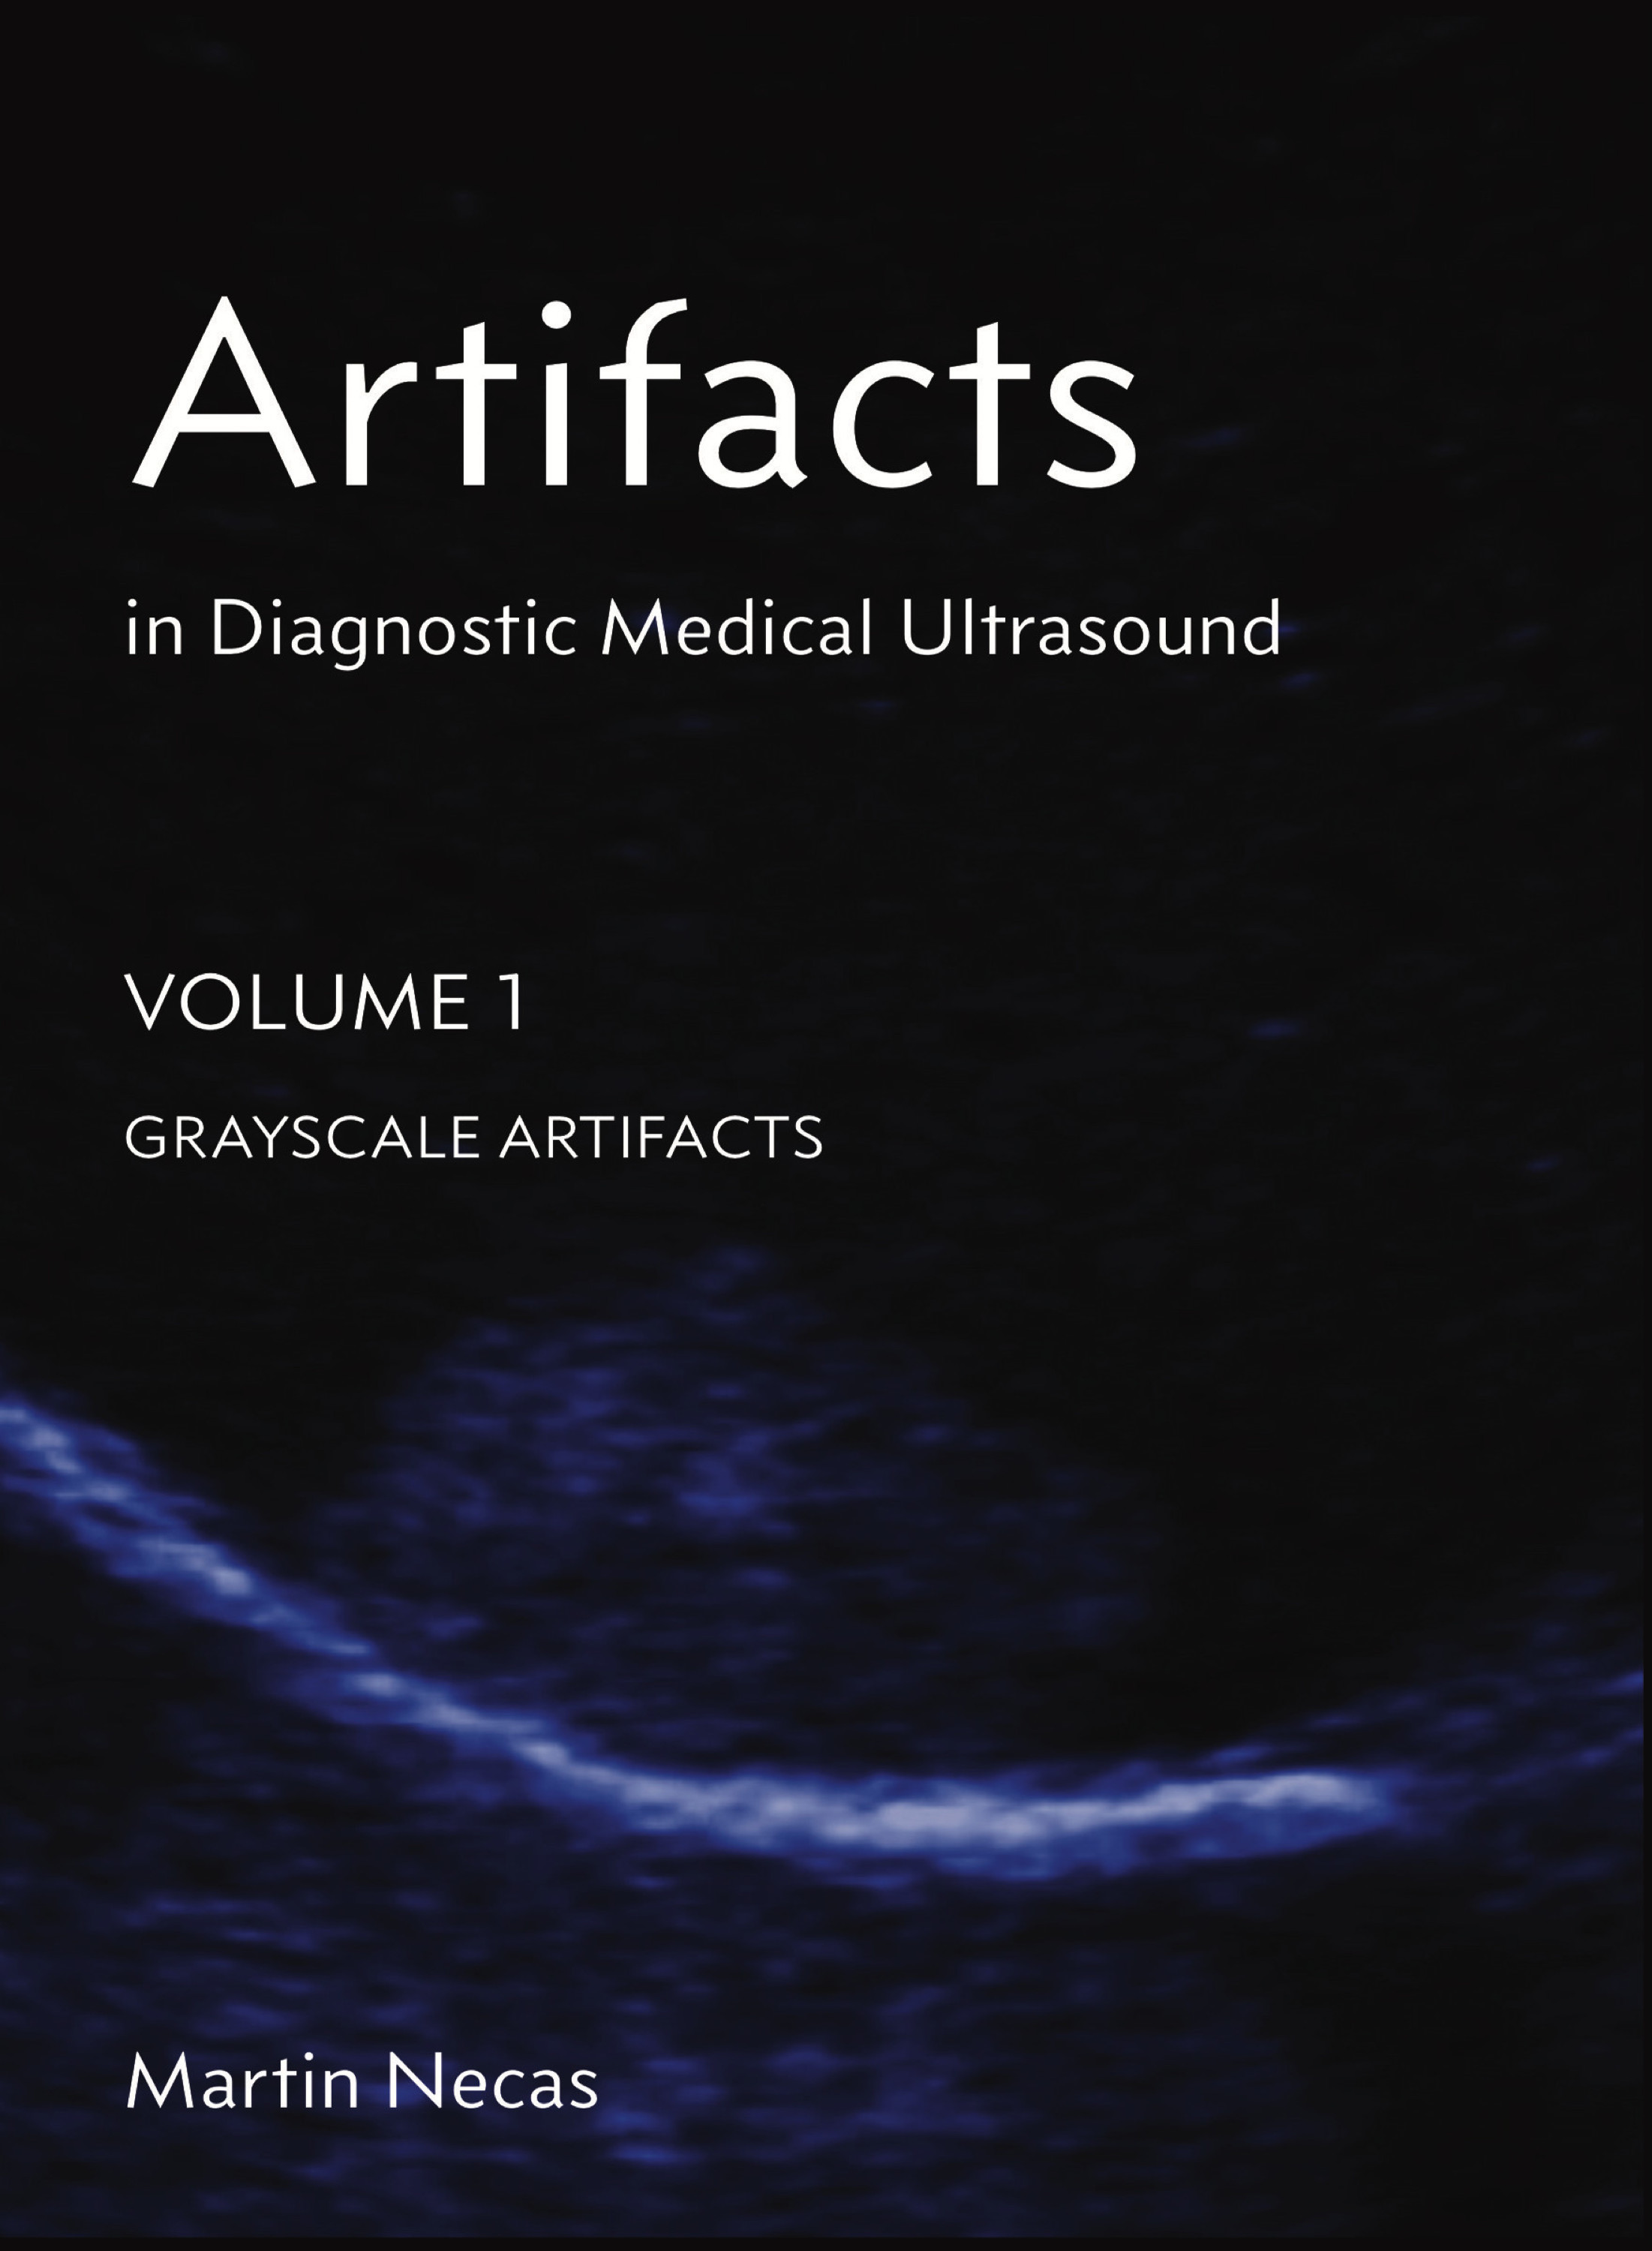 Artifacts in Diagnostic Medical Ultrasound